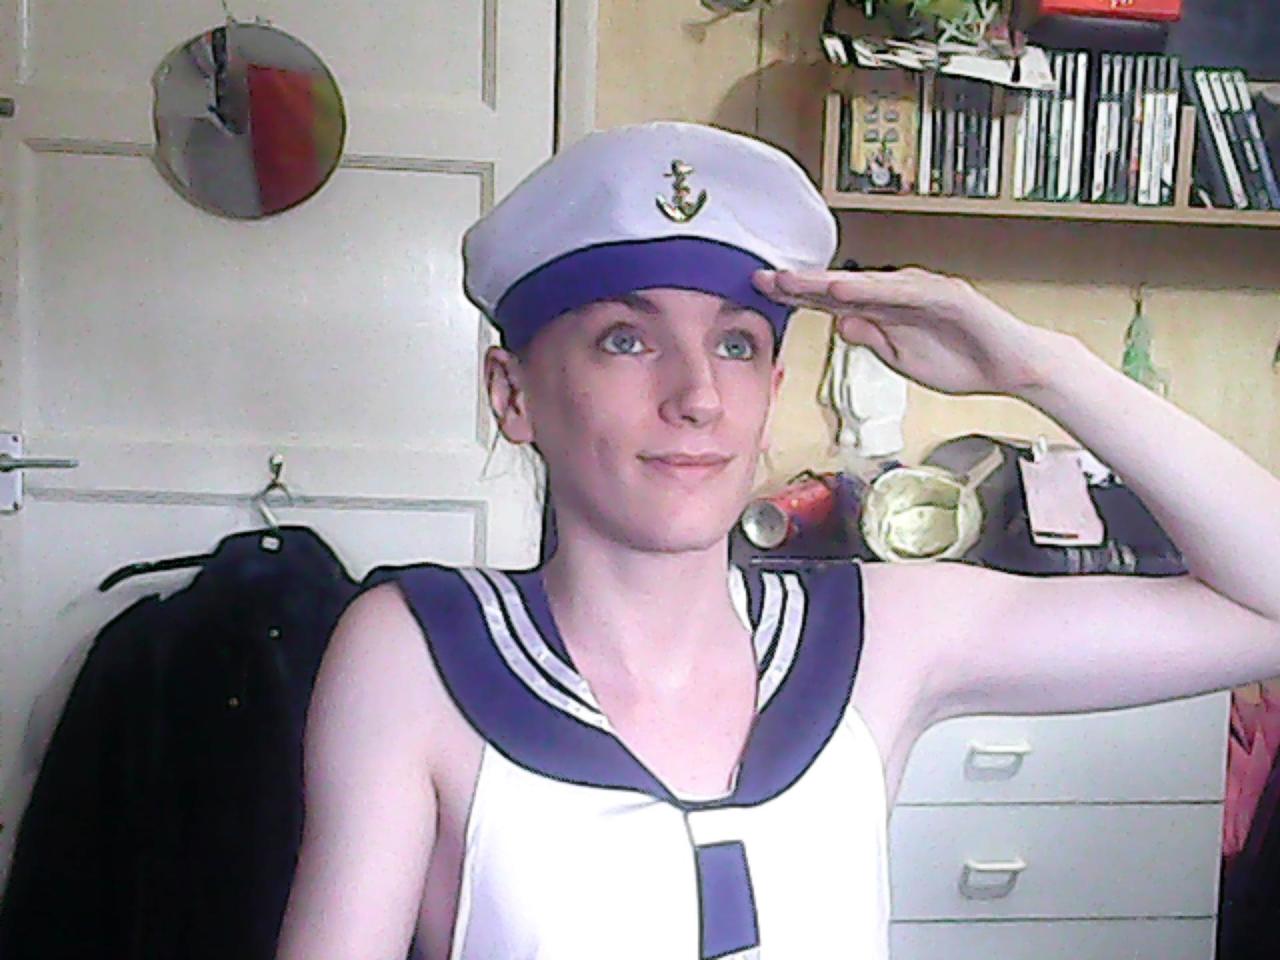 Outfit Overhaul - Sailor boy Respect to all my marine buddies out there - You